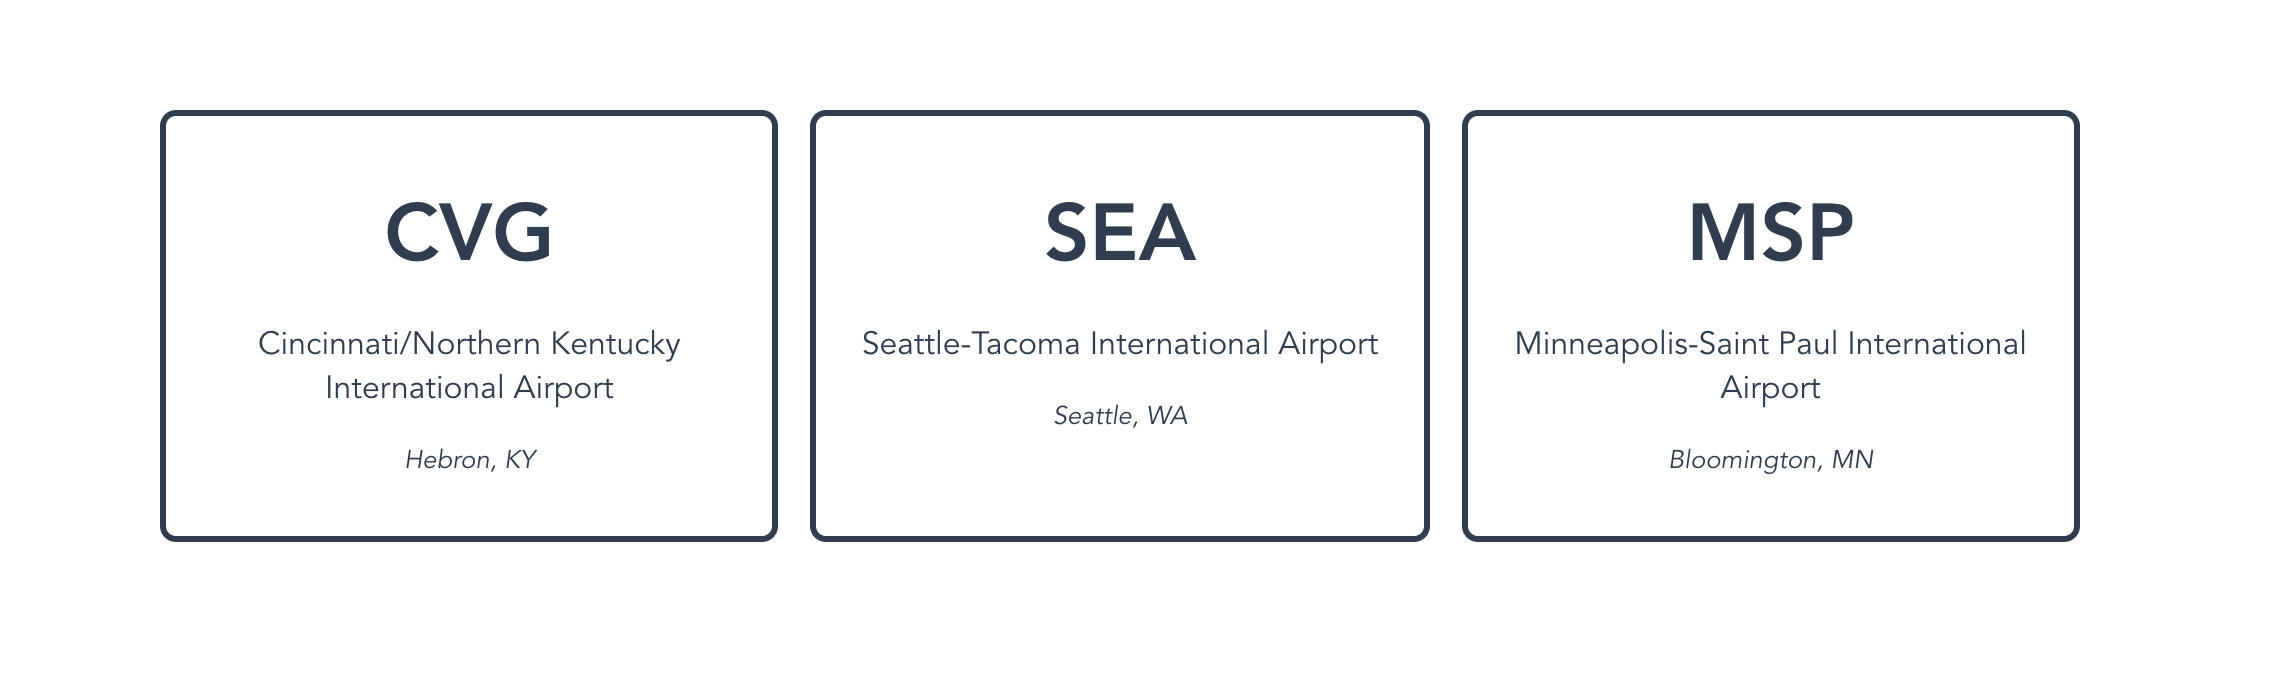 Styled cards containing airport data from the staging dataset.